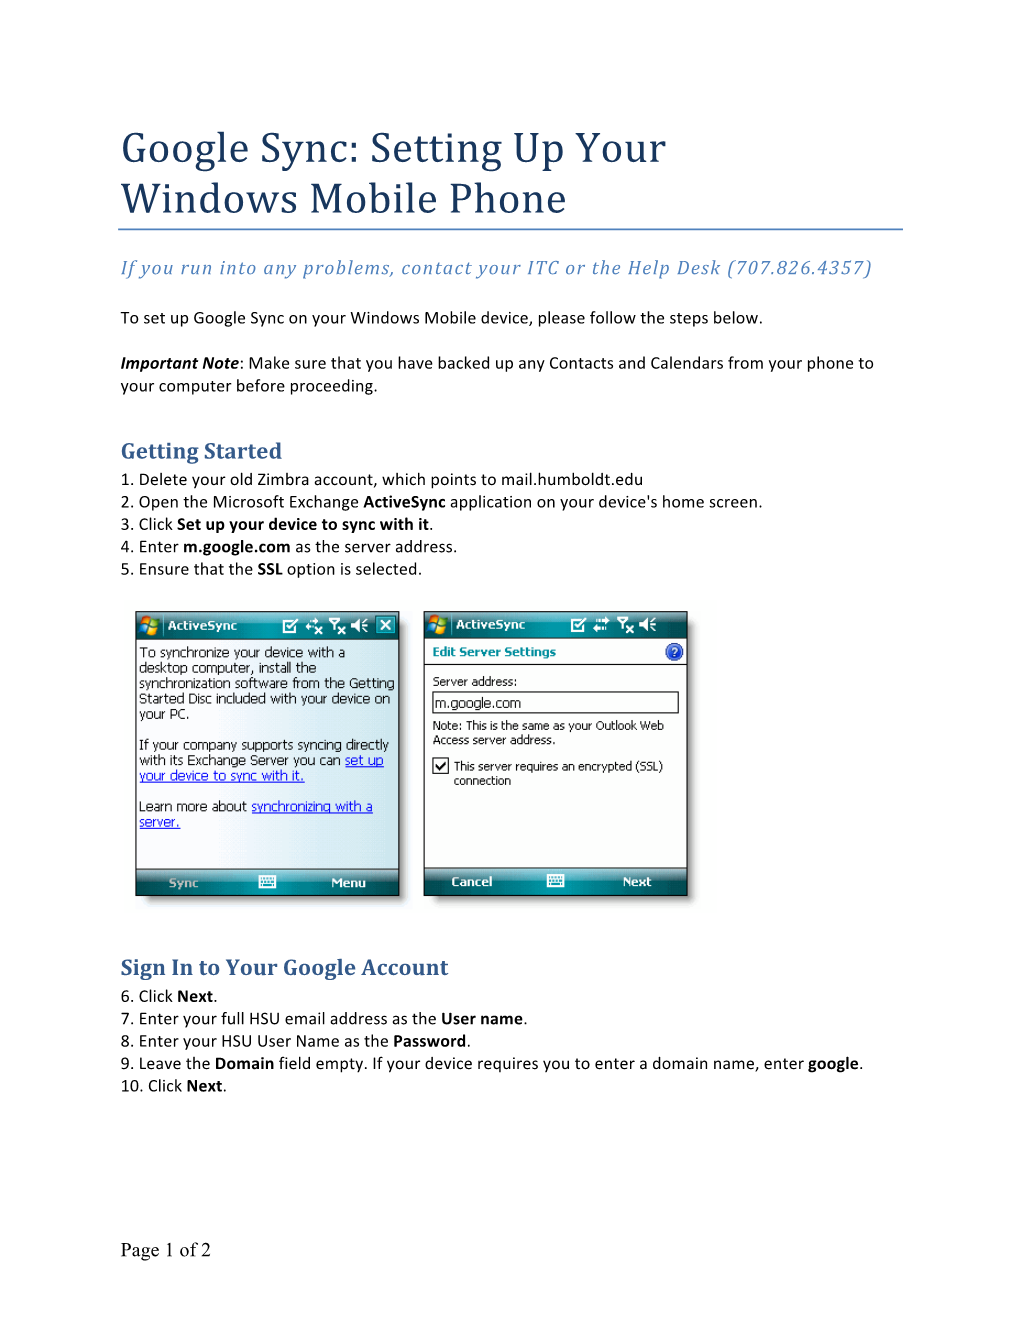 Google Sync: Setting up Your Windows Mobile Phone